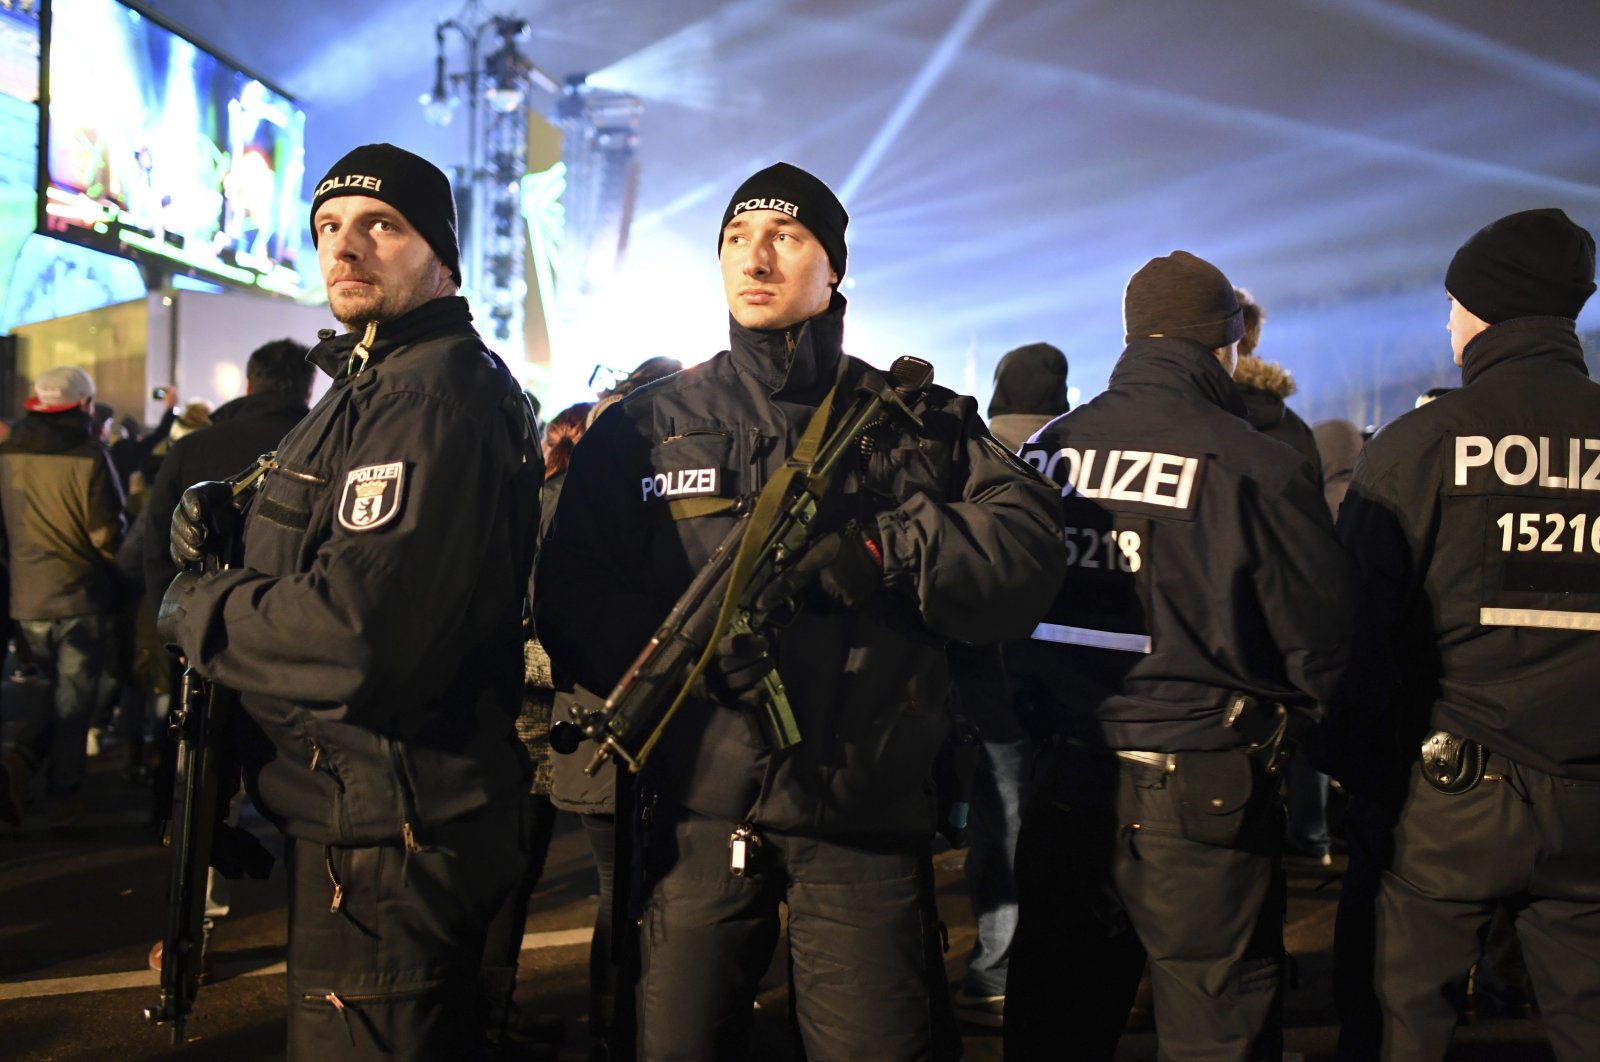 Police officers with submachine guns secure the New Year's Eve party at the Brandenburg Gate in Berlin, Saturday, Dec. 31, 2016. (AP Photo)